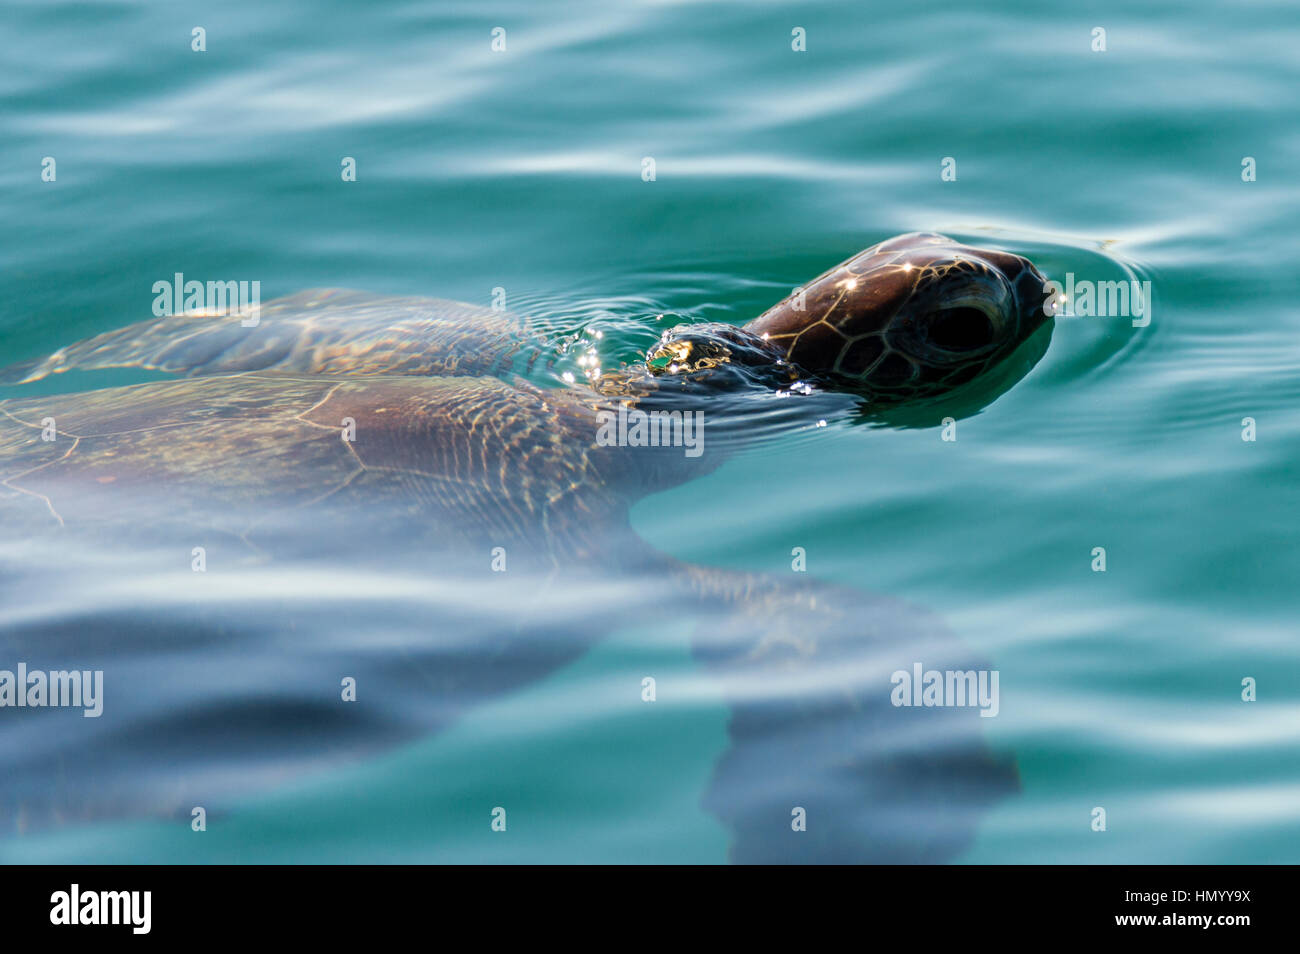 A Green Turtle surfaces to breathenear a reef. Stock Photo